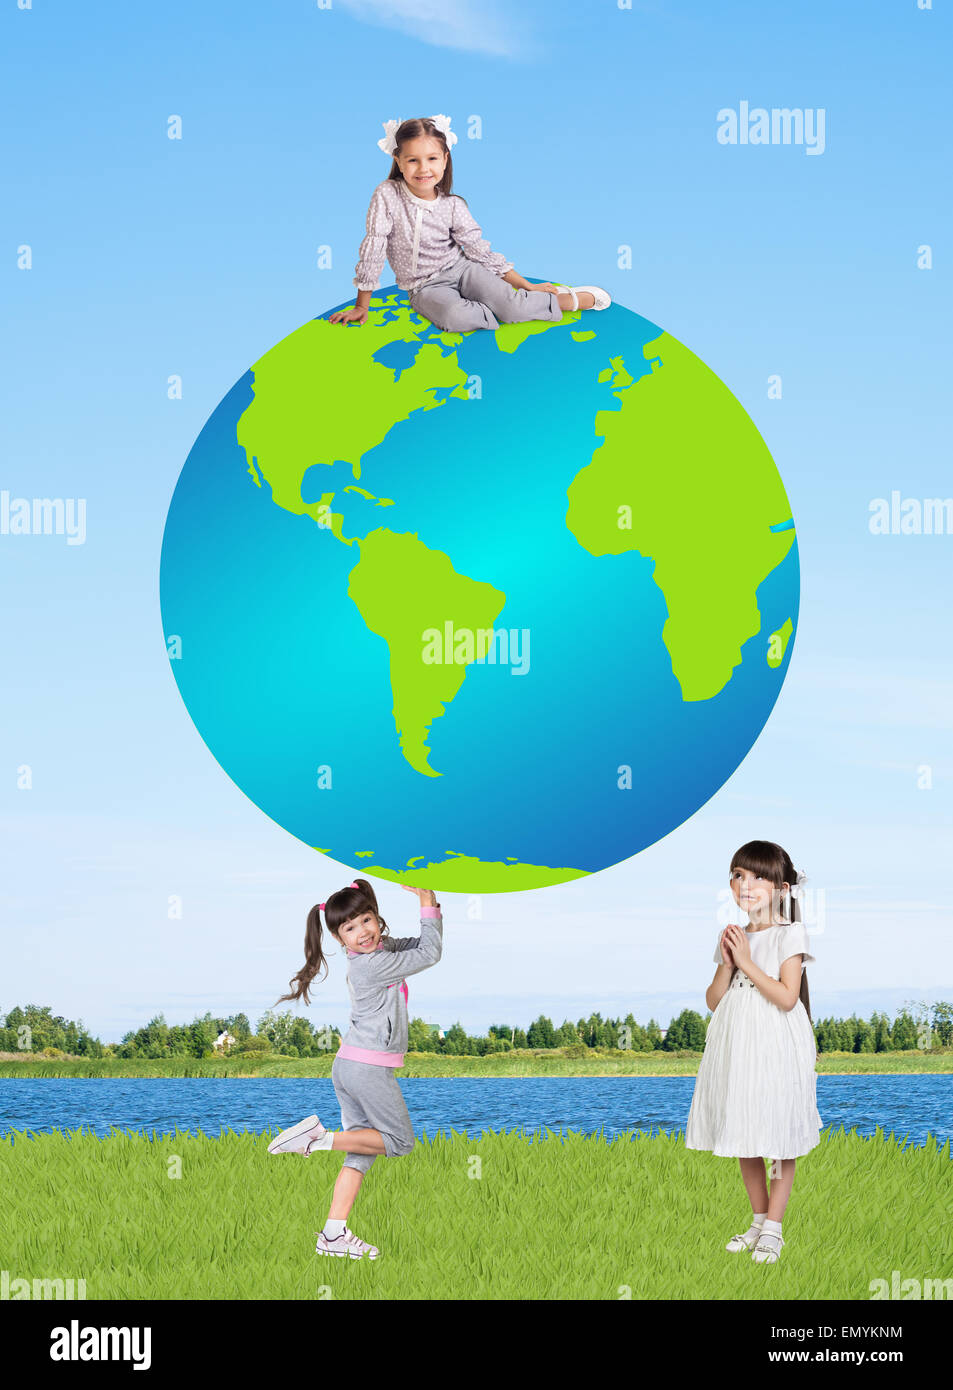 Little smiling girls with a globe Stock Photo